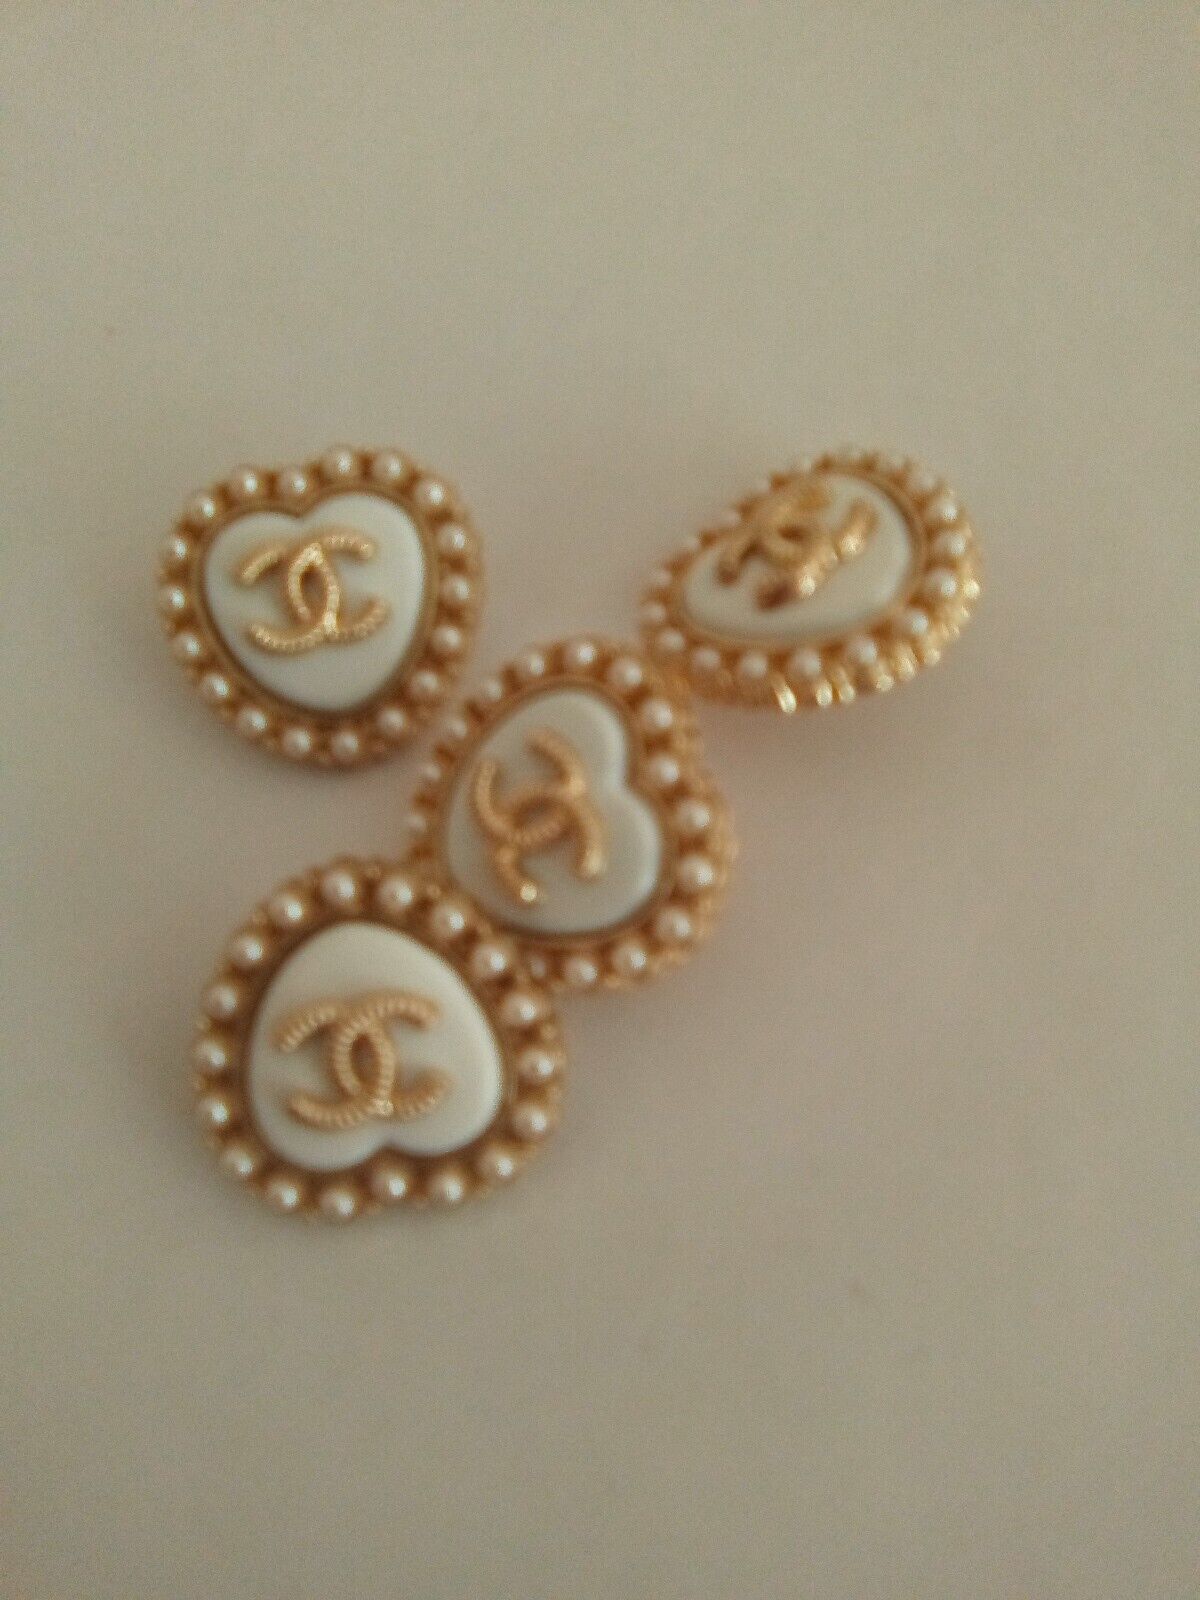  Lot Of 4 STAMPED 22mm  Designer Button Gold   tone Chanel Button 